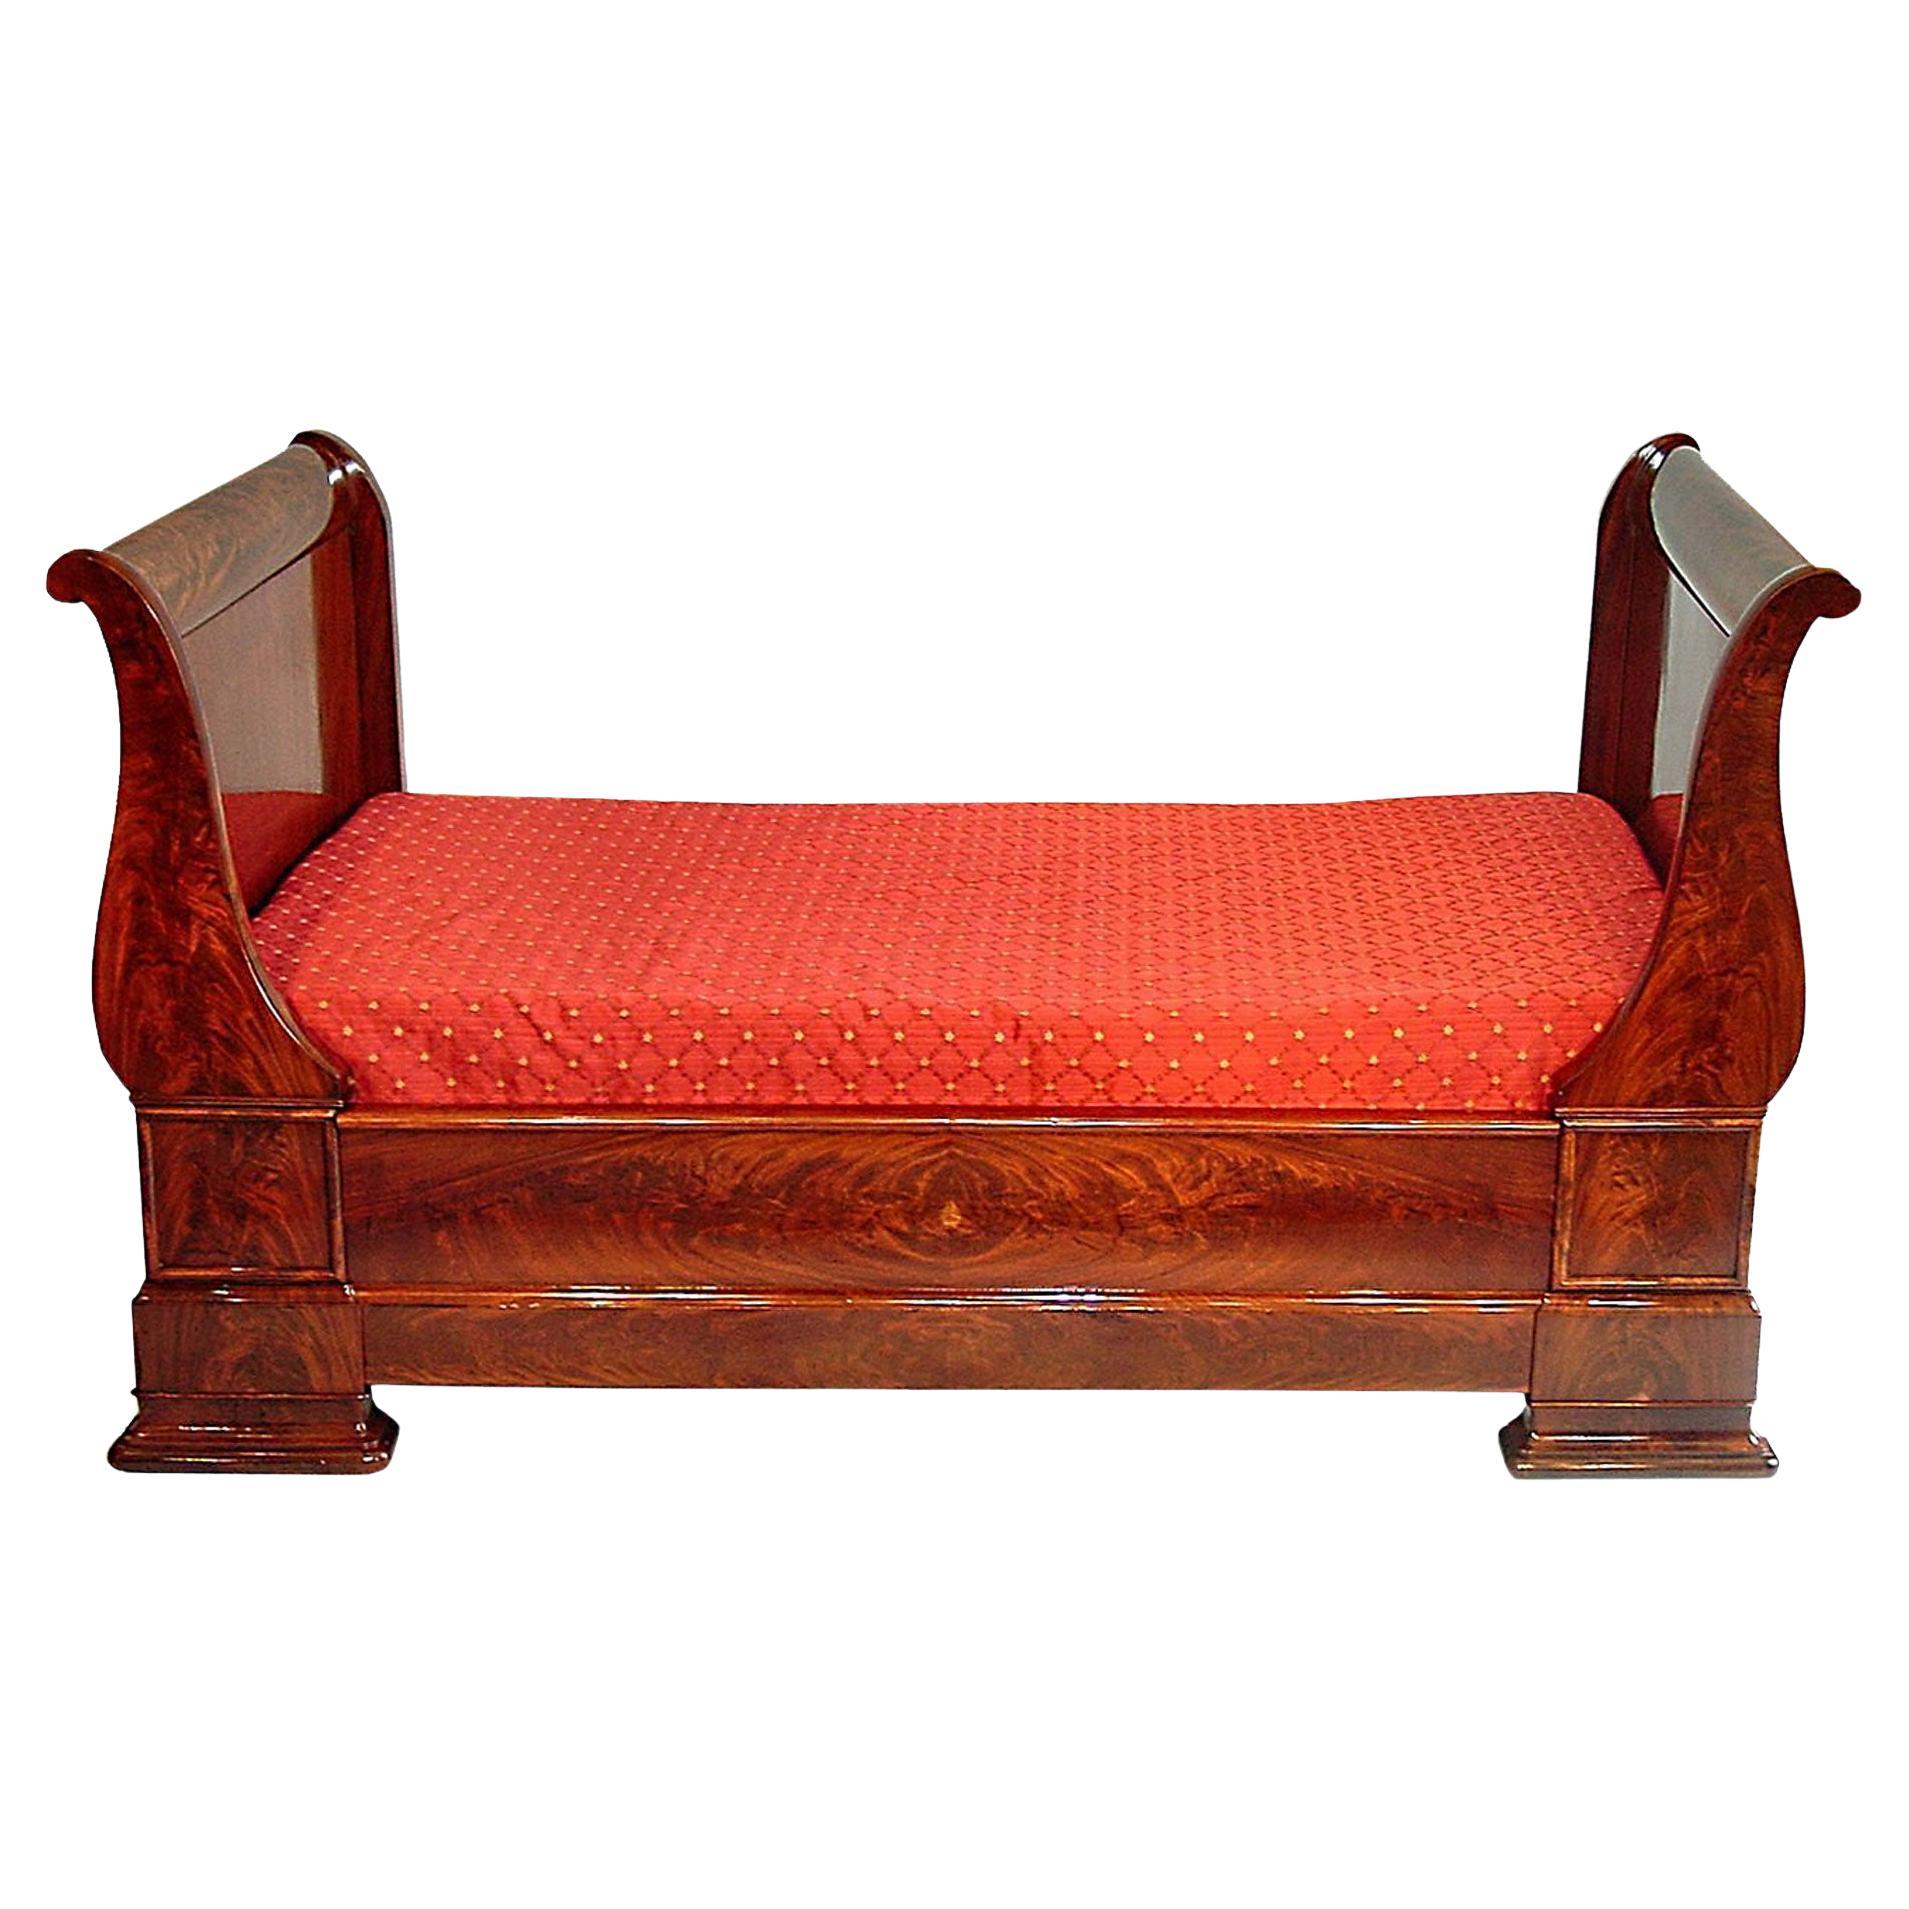 French 19th Century Neoclassical Style Crouch Mahogany Sleigh Bed